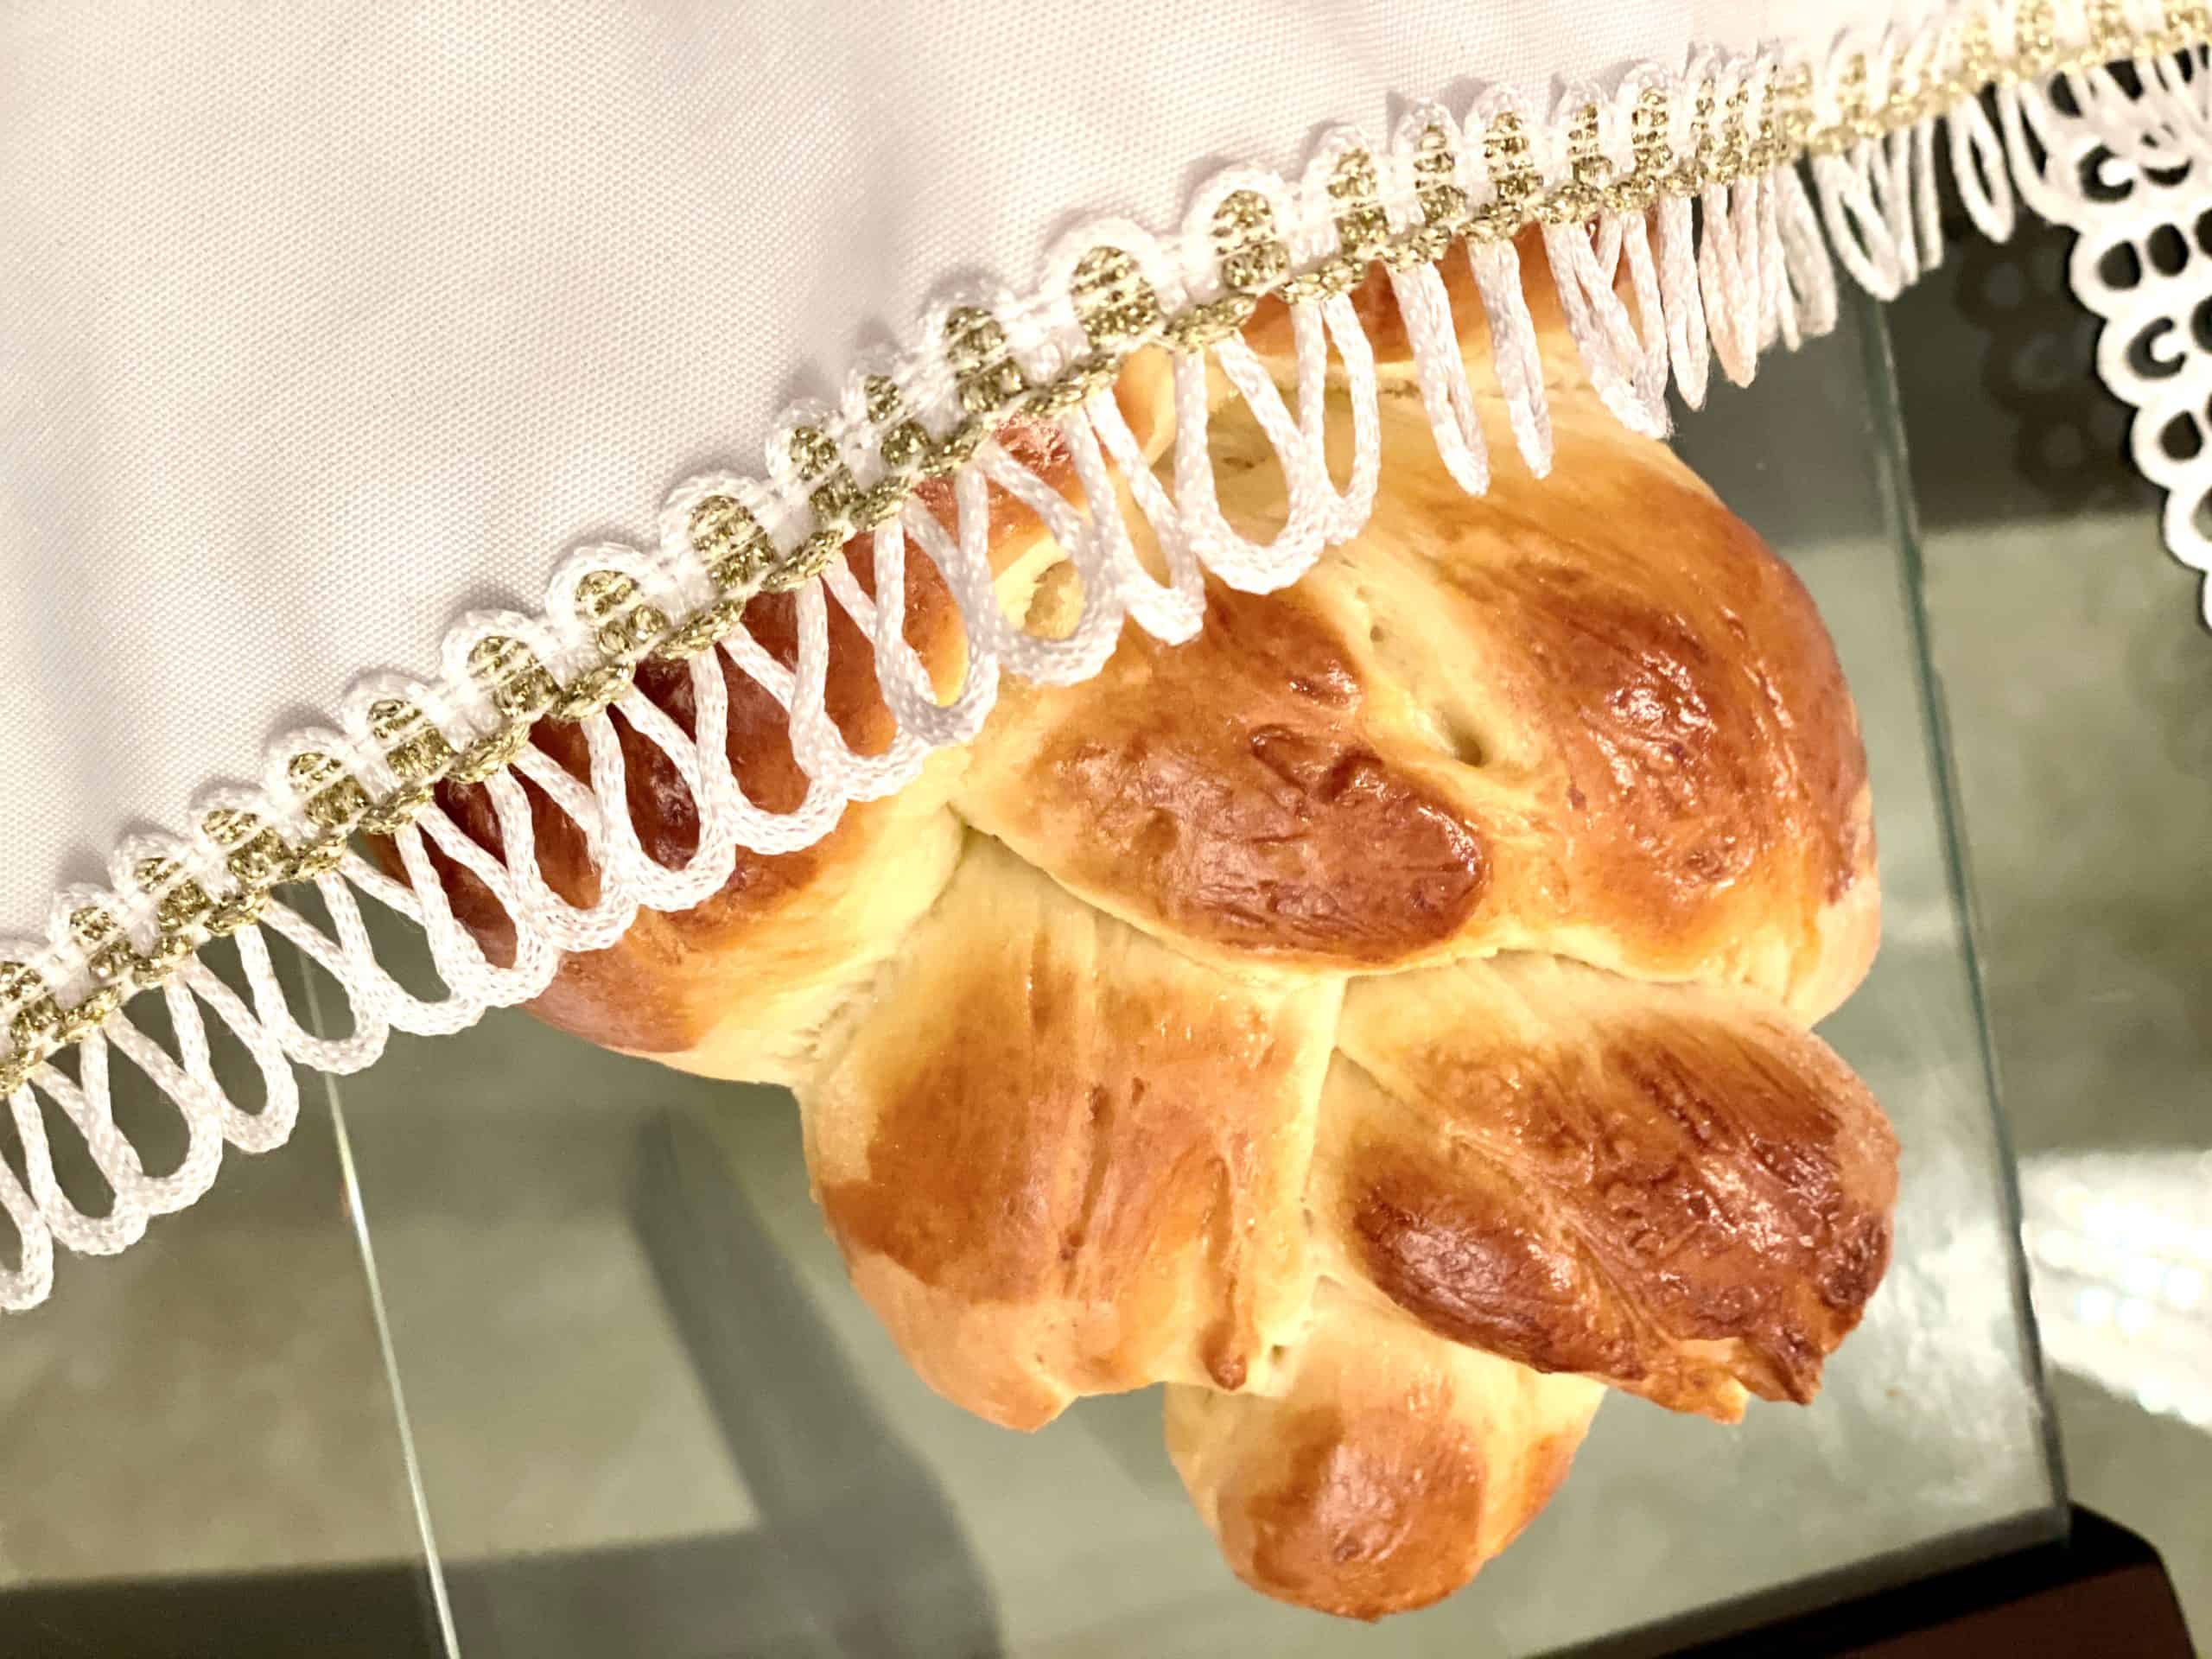 How to make my family’s favorite fluffy challah